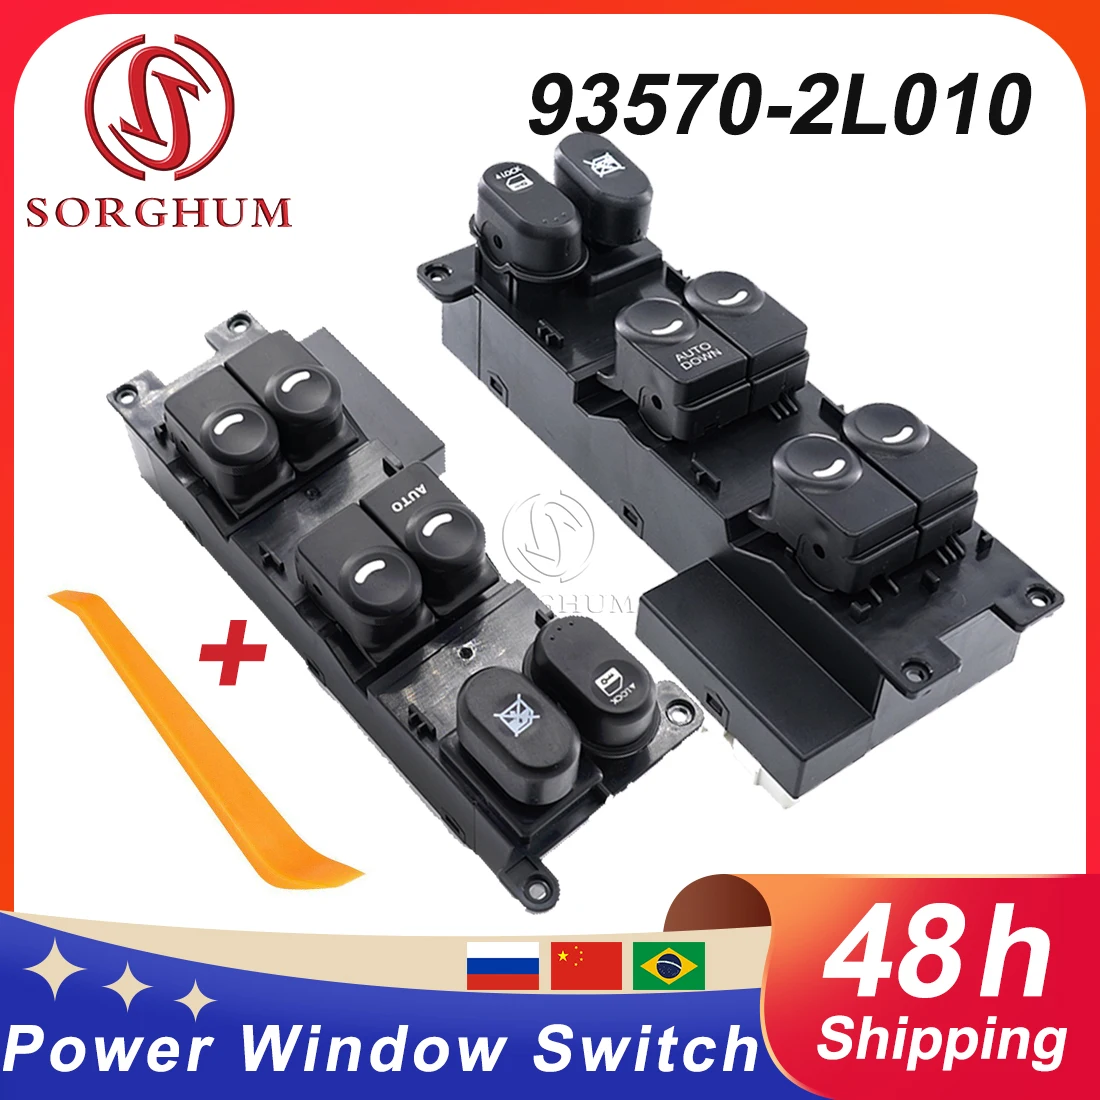 Sorghum Car Power Master Window Lifter Control Switch LH Driver's Side 93570-2L010 93570-2L000 For Hyundai i30 I30cw 2008-2011